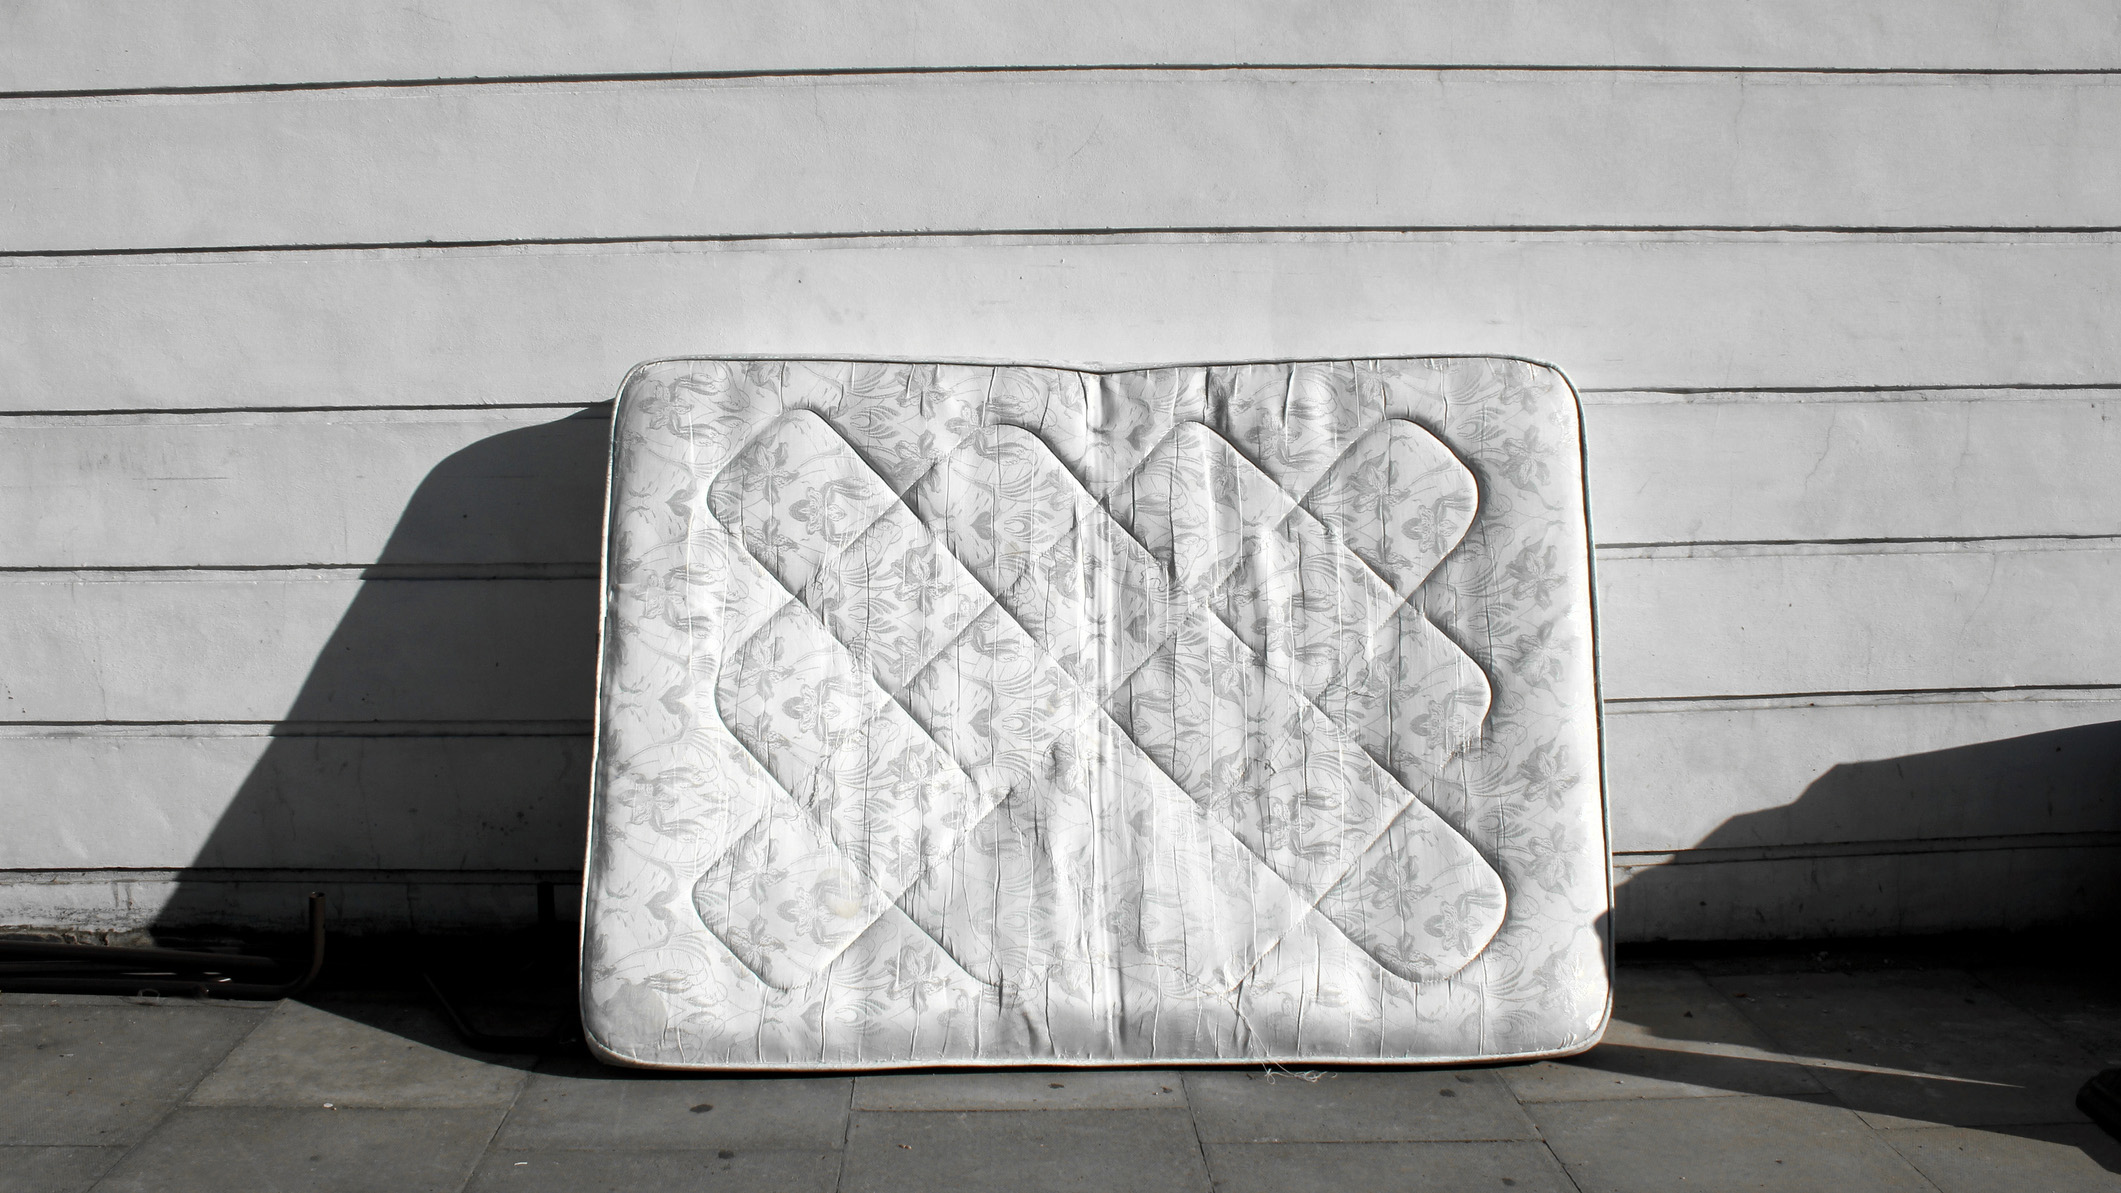 Image shows a white mattress lent against a white wooden wall outside a house on a sunny day